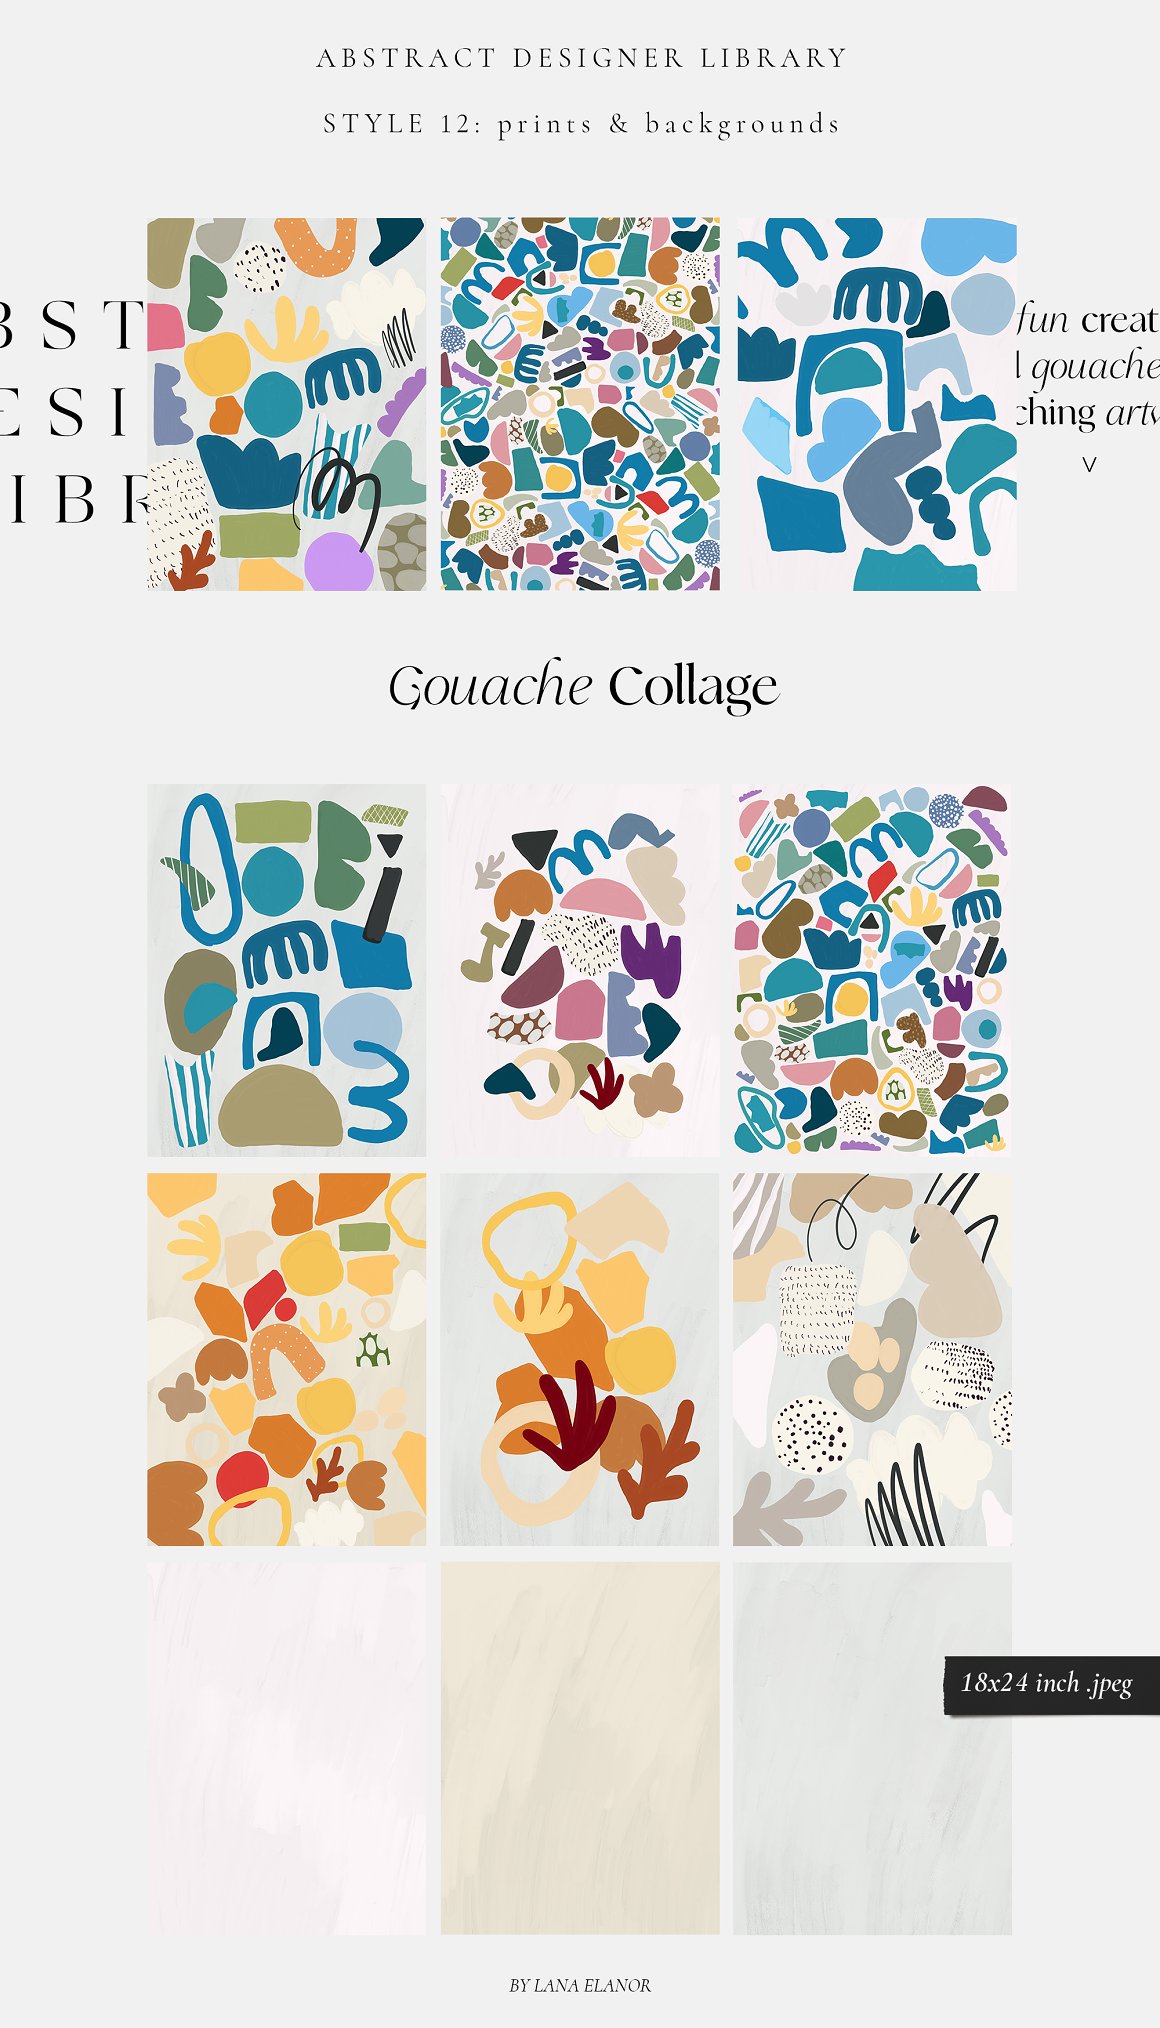 Gouache collage library on a gray background.